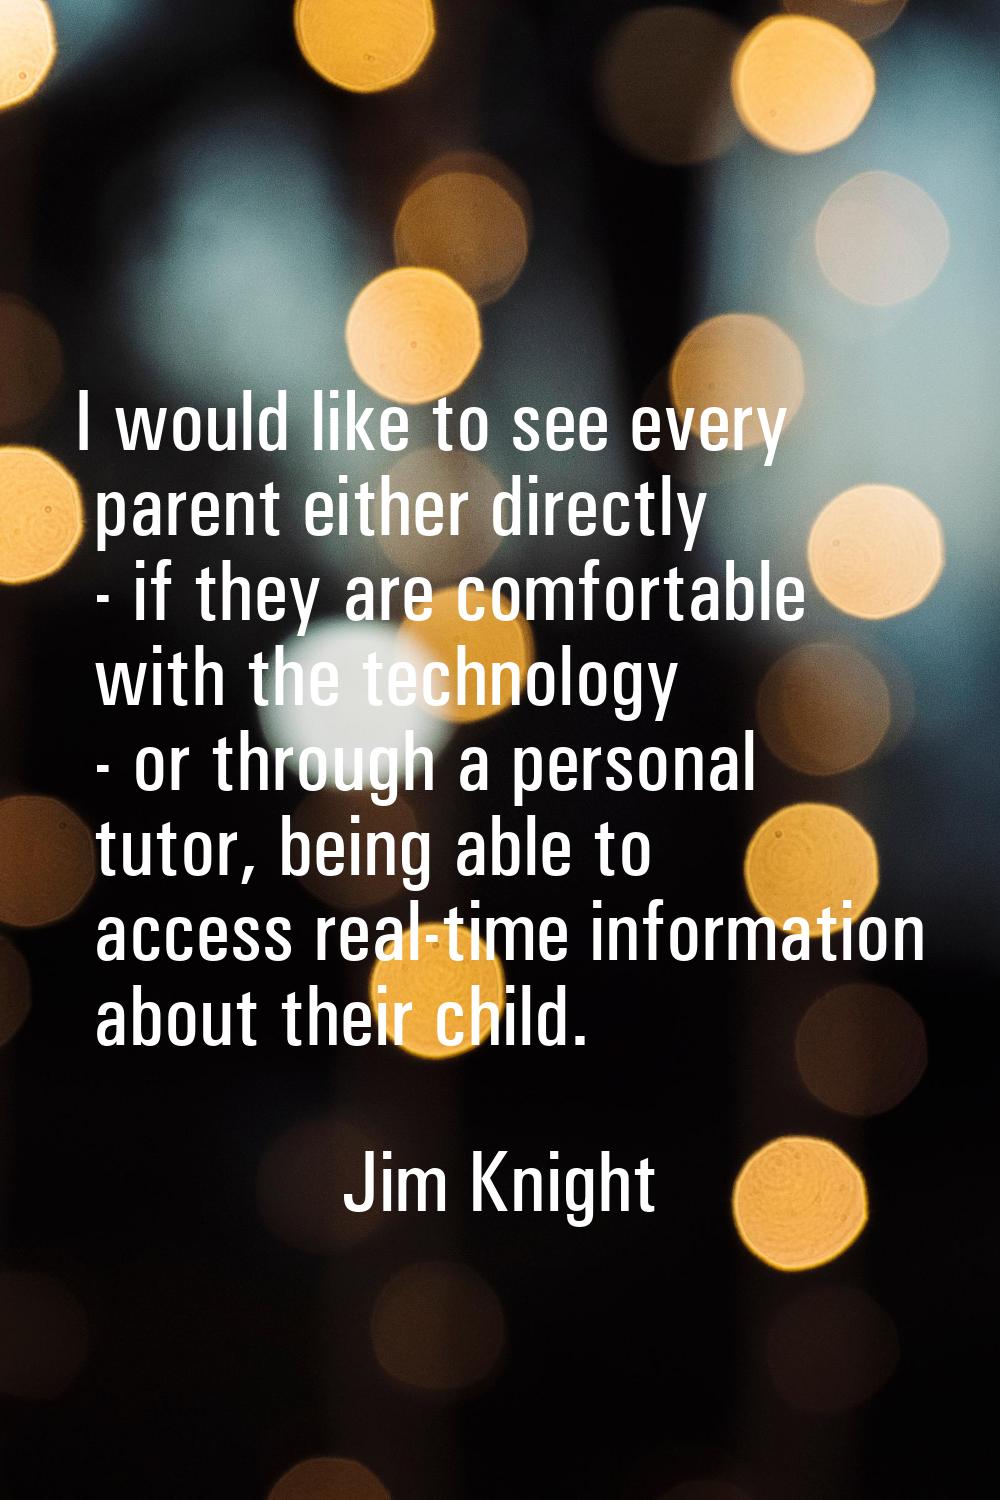 I would like to see every parent either directly - if they are comfortable with the technology - or